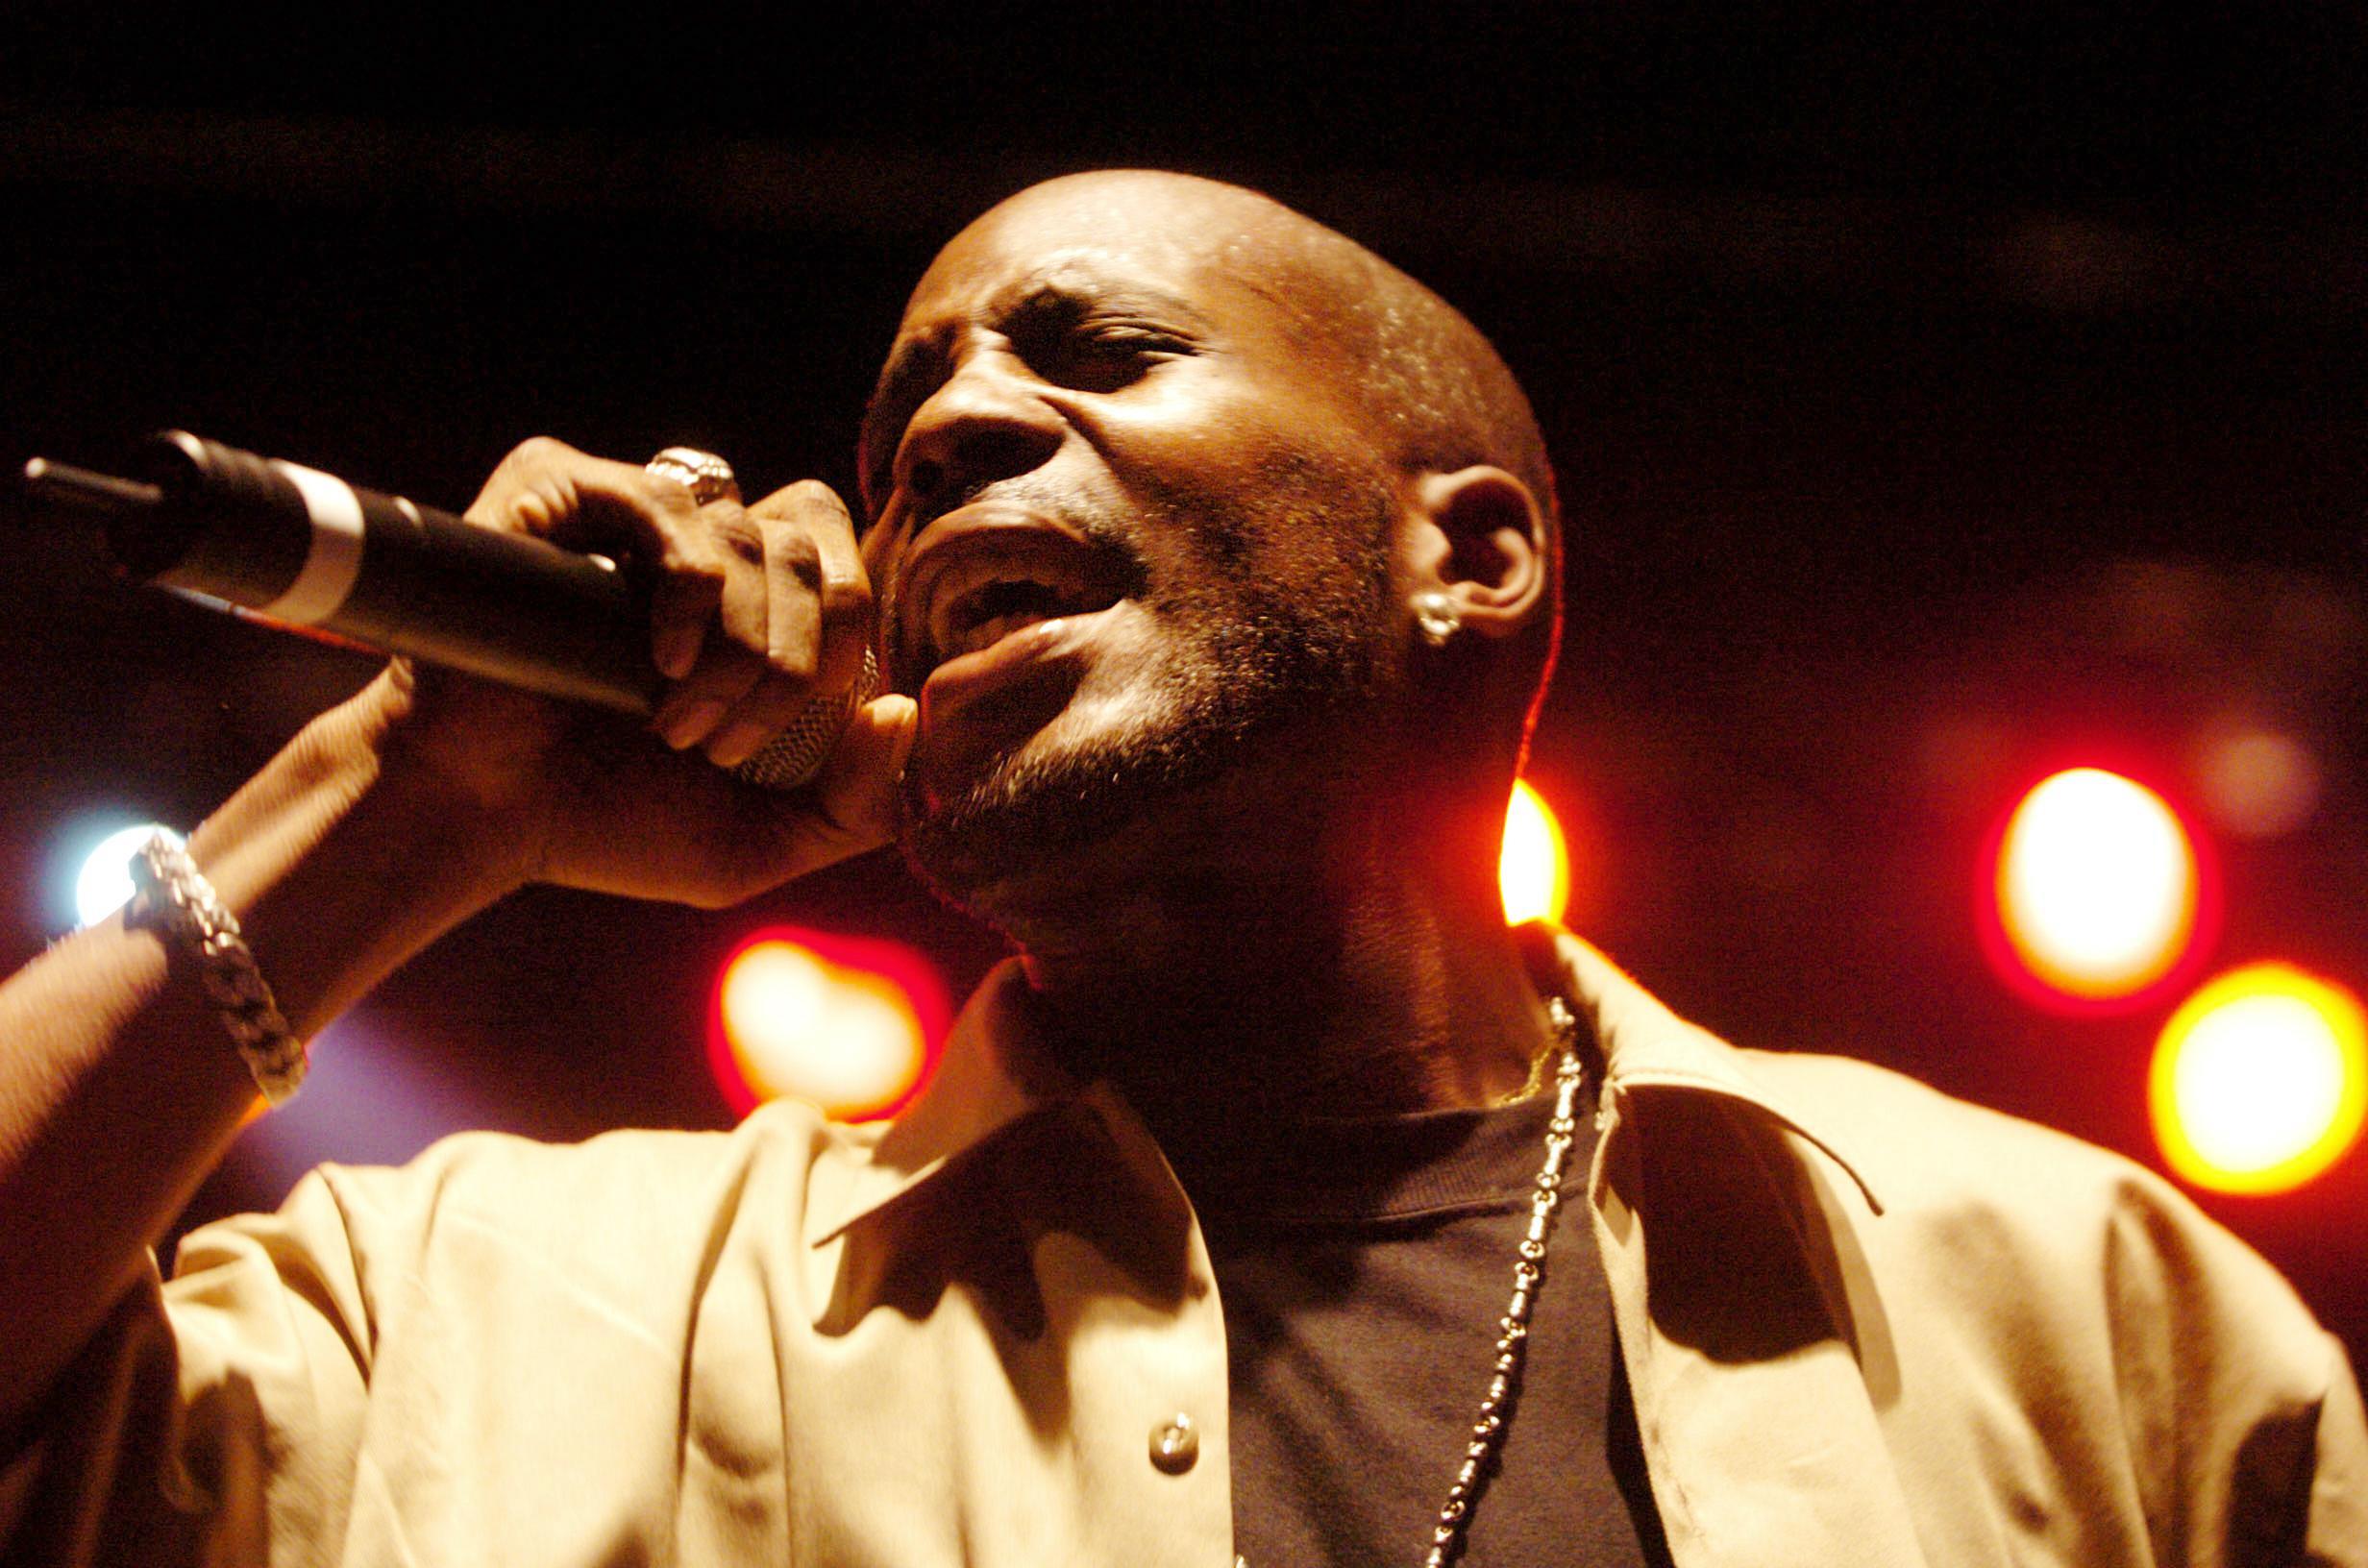 DMX rapping into a microphone